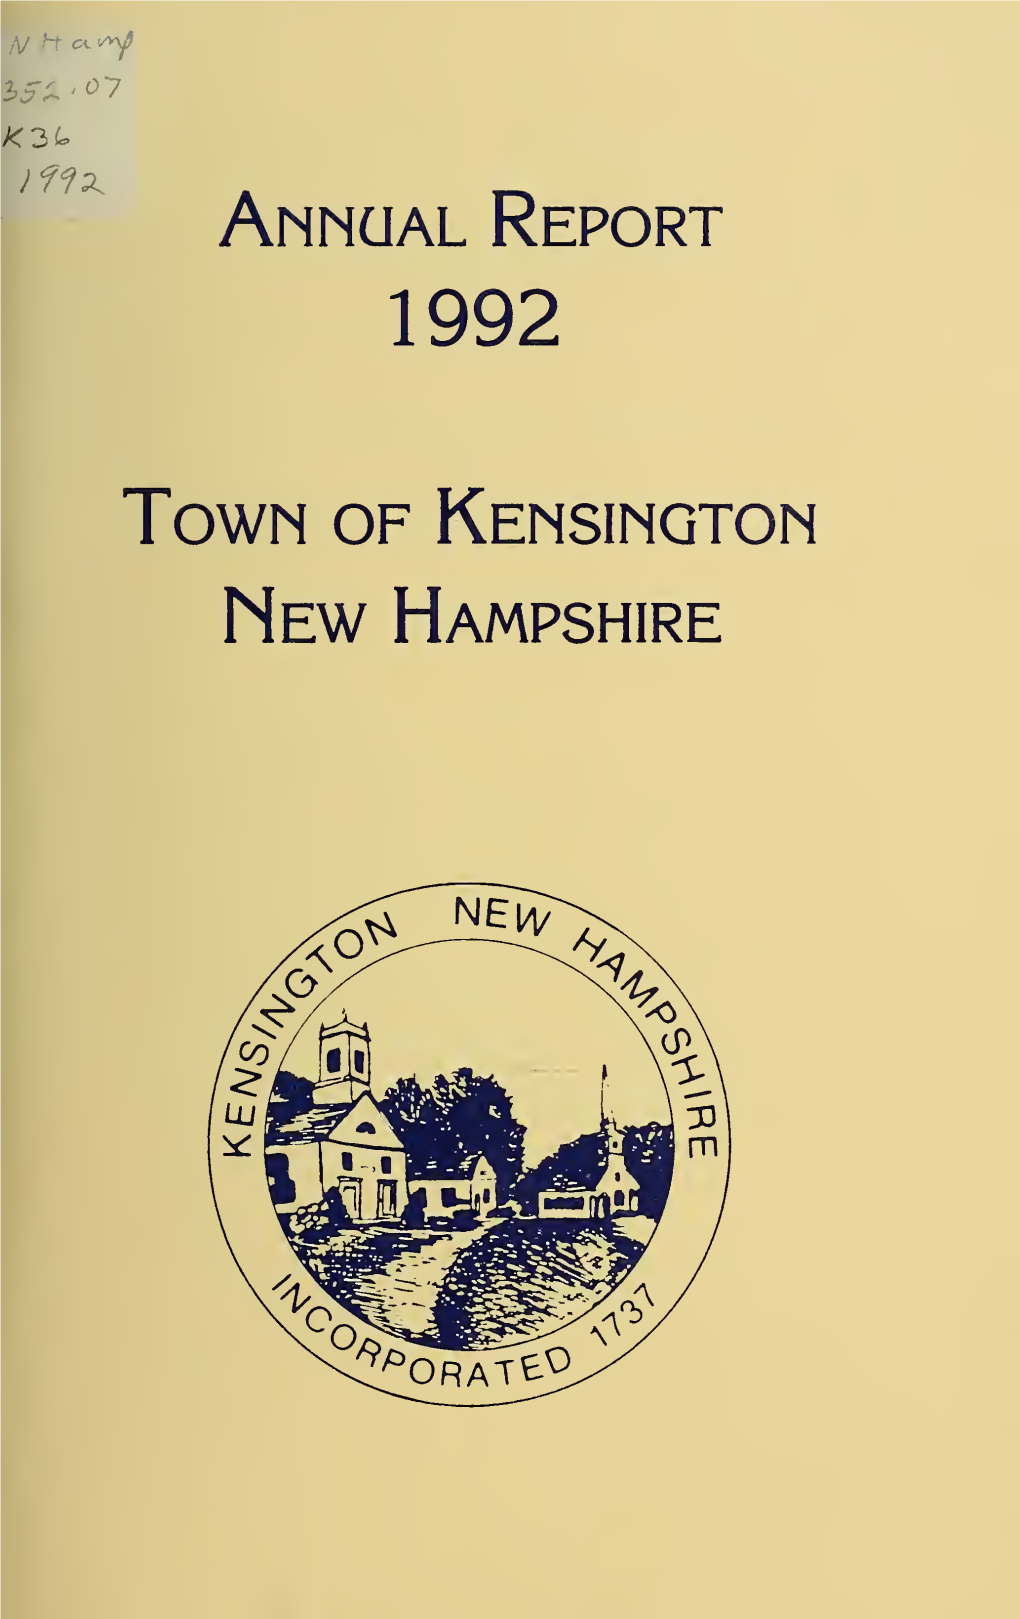 Annual Report 1992, Town of Kensington, New Hampshire